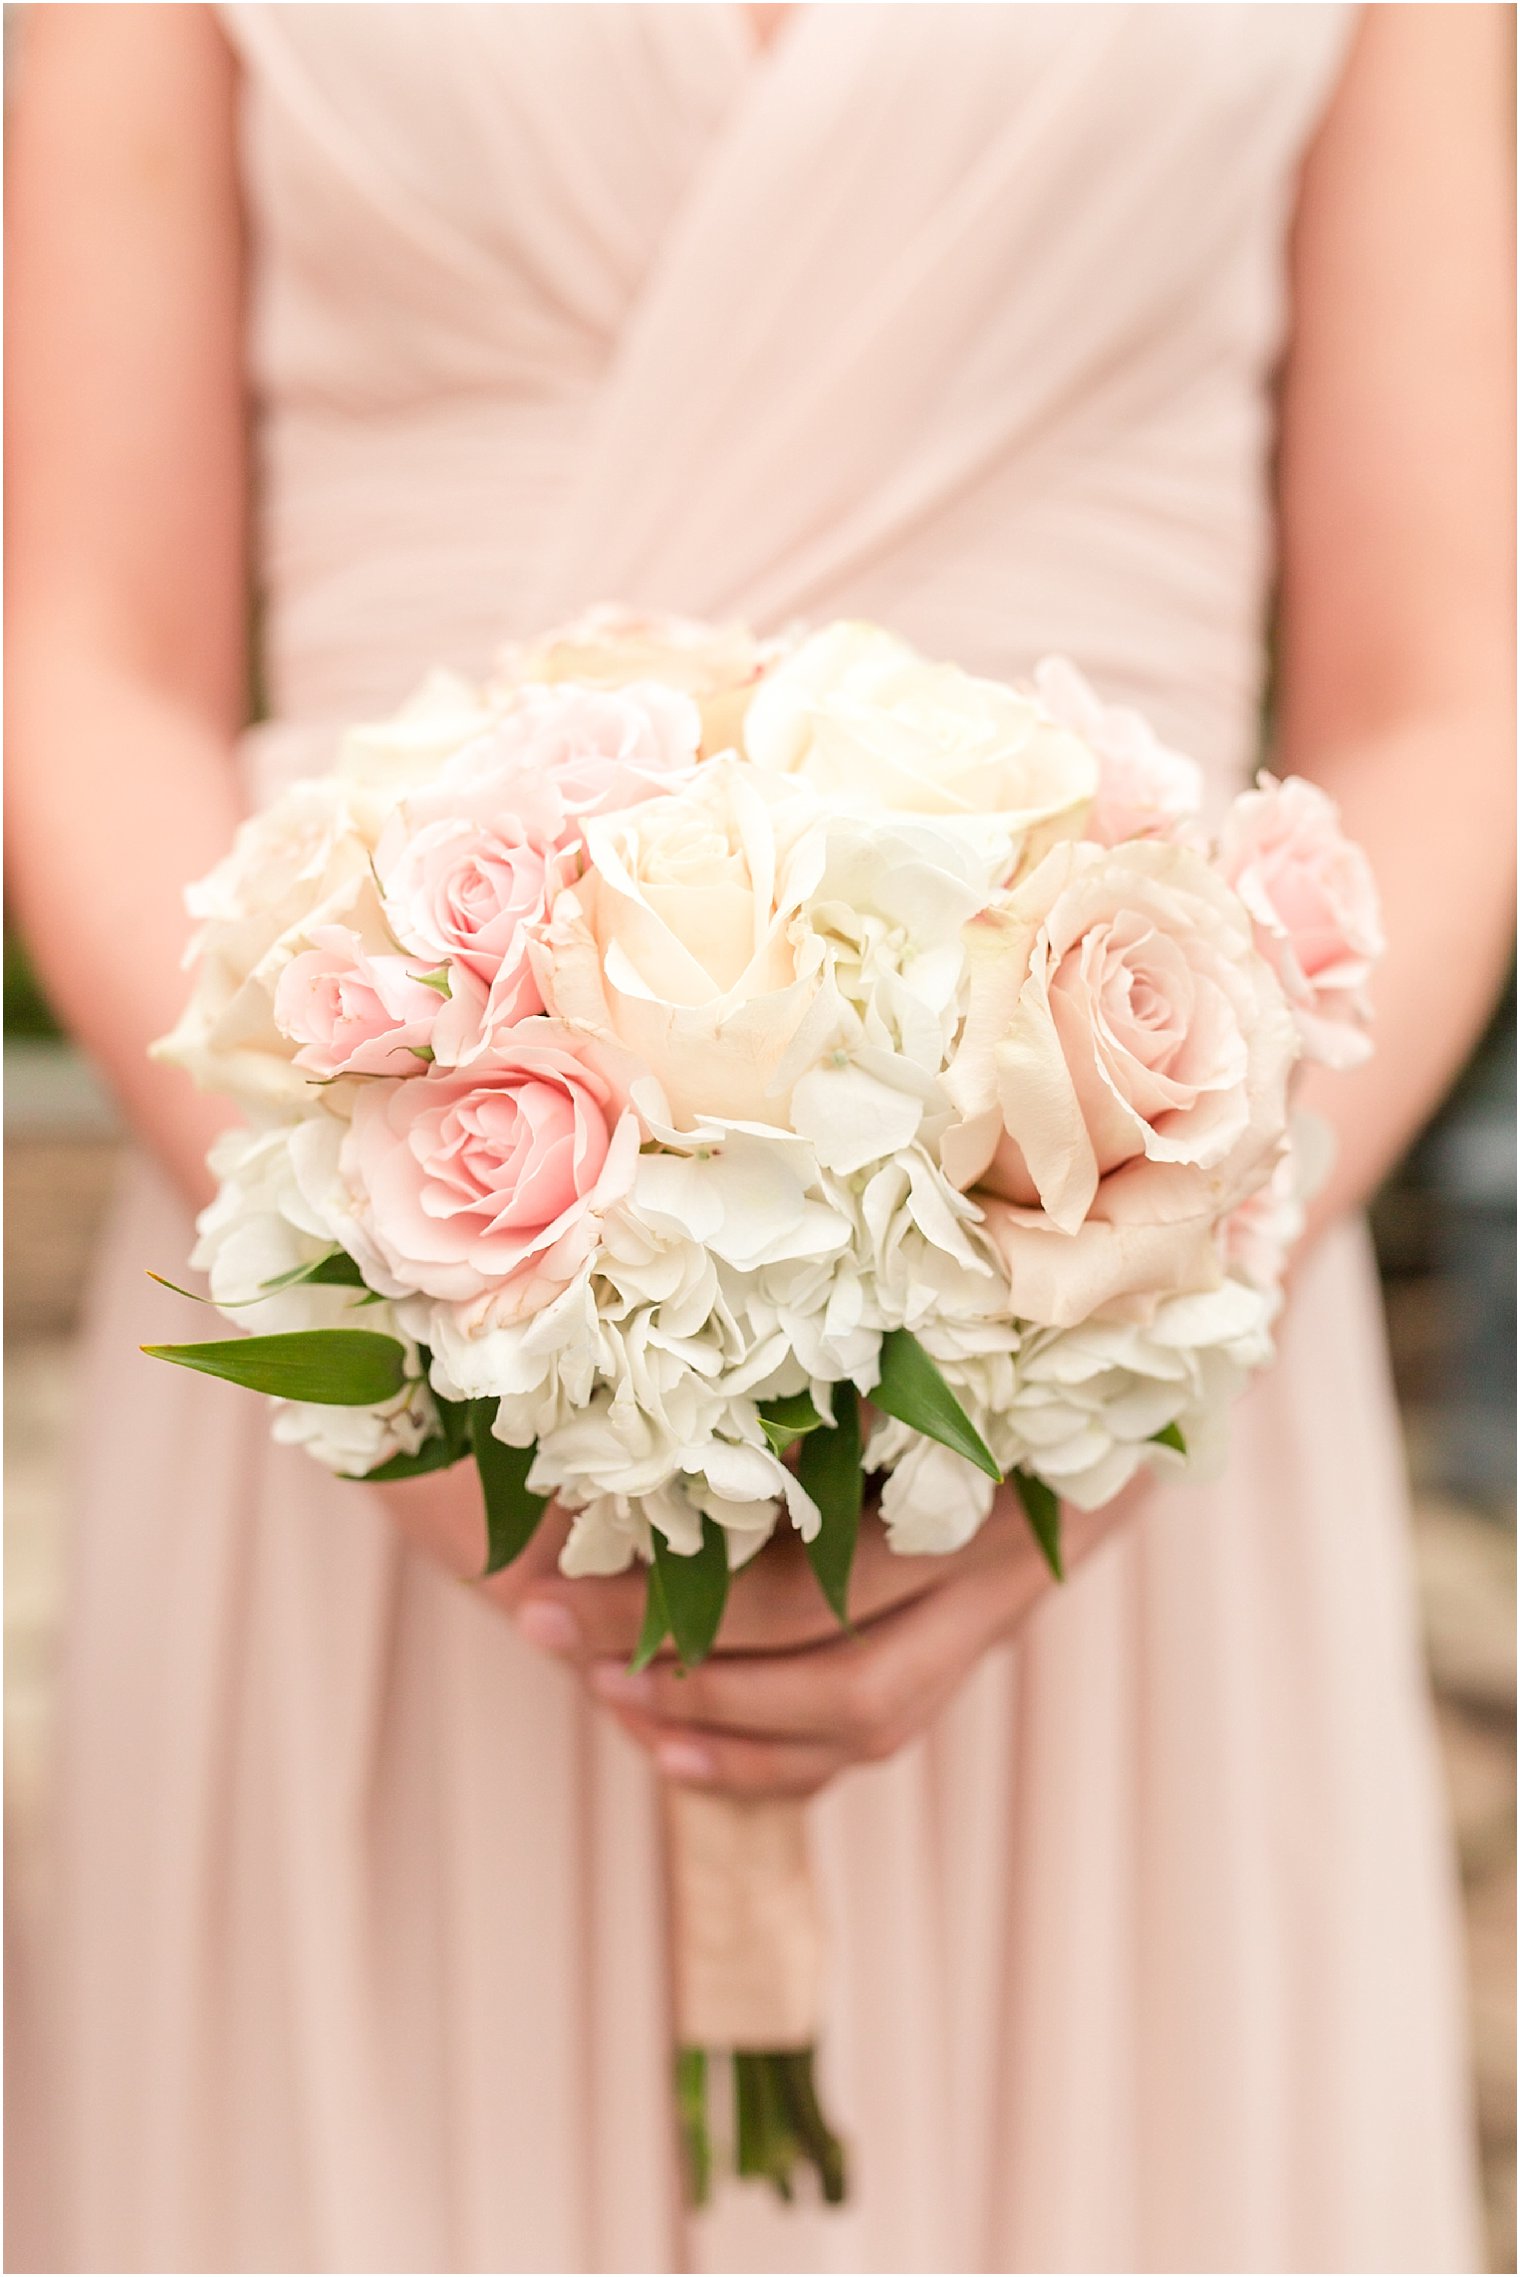 Blush and cream bouquet by Yumila Florals